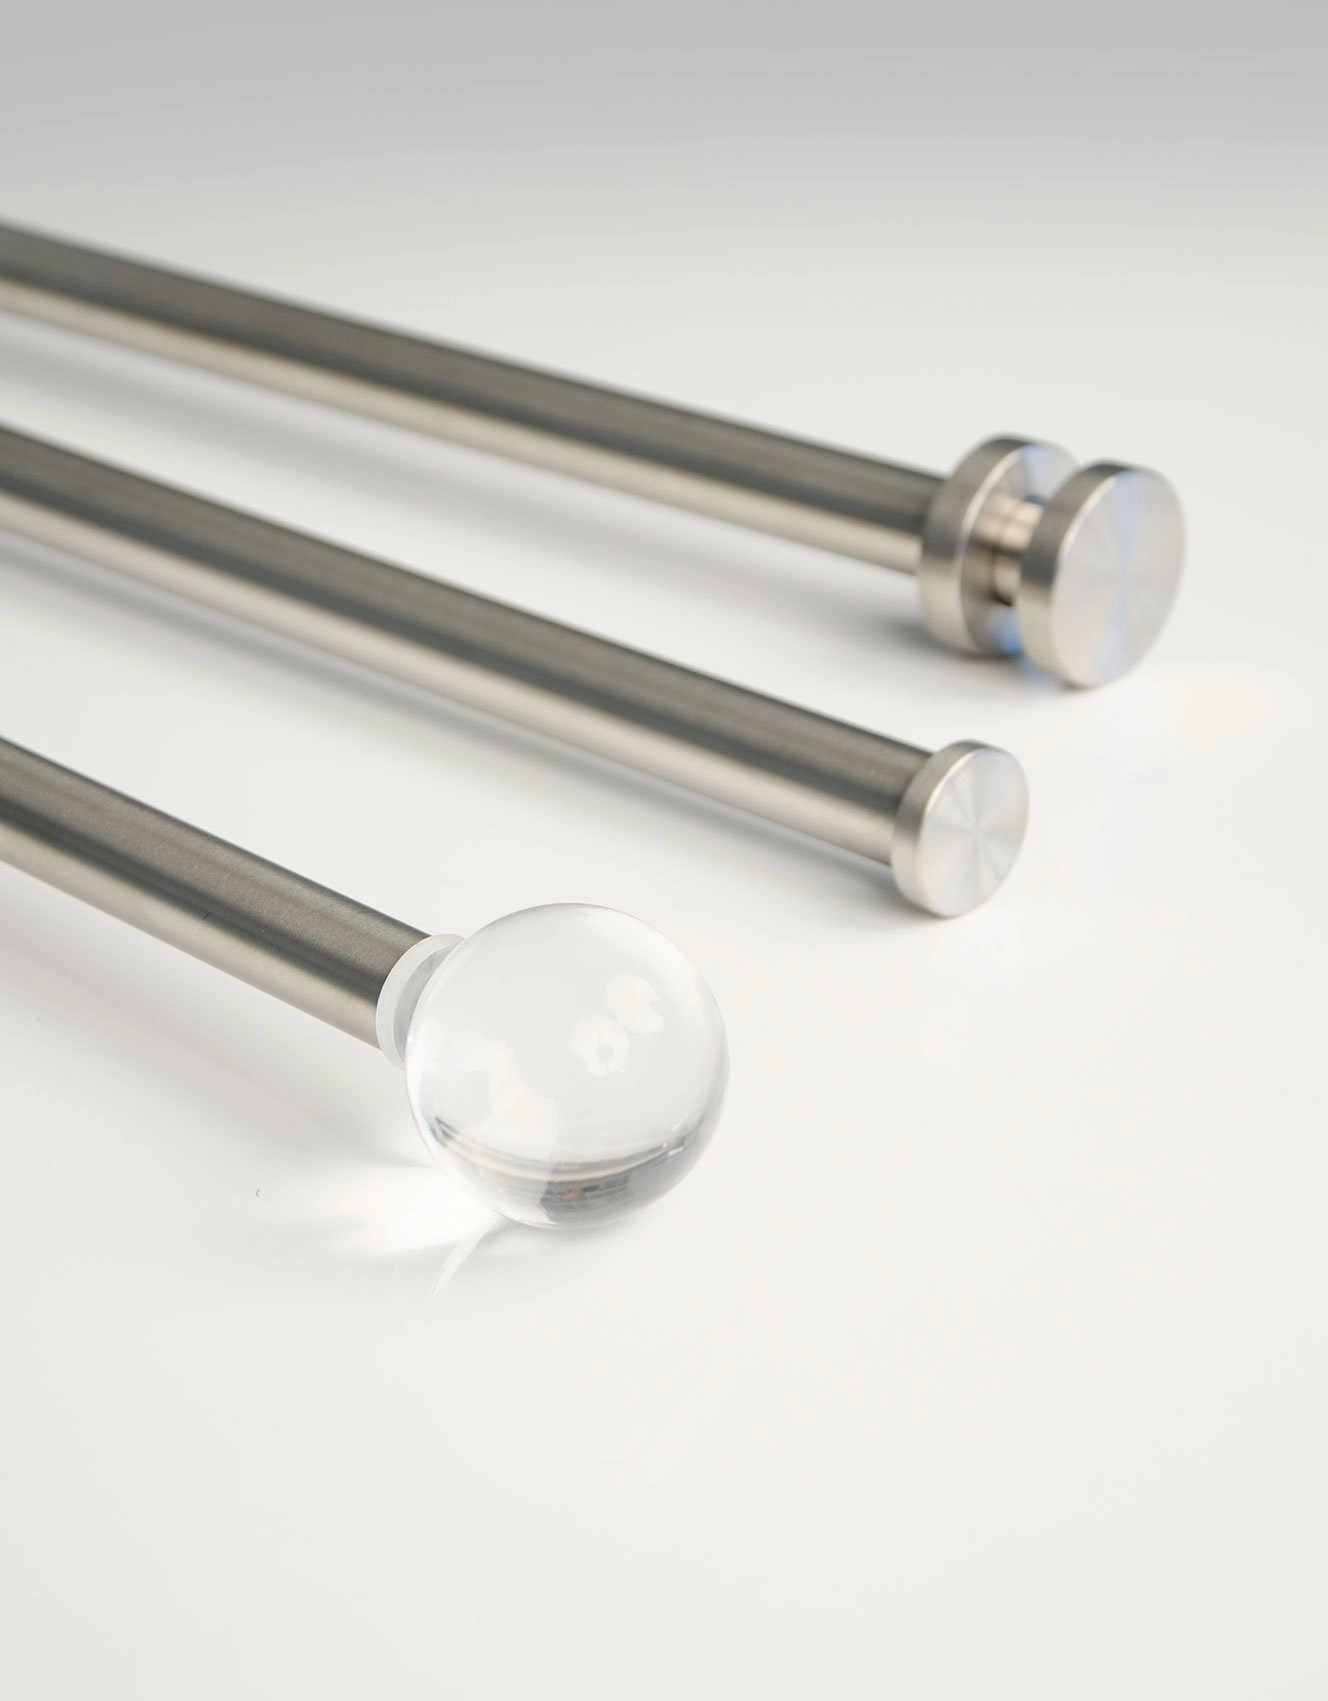 Hasta Home stainless steel curtain rods